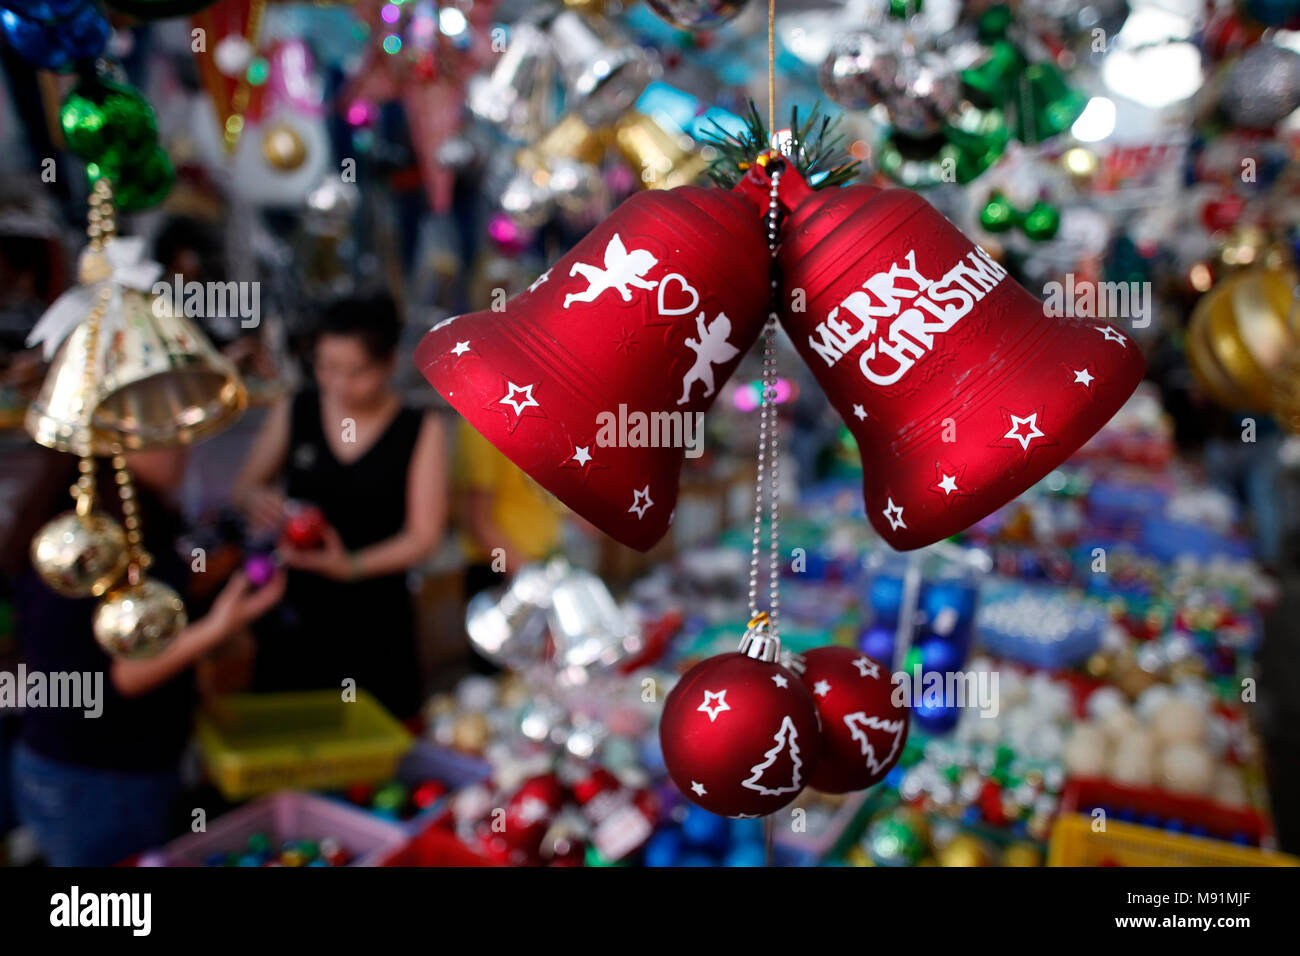 Vietnamese people shopping at market place to buy ornament for Christmas holiday.  Ho Chi Minh City. Vietnam. Stock Photo